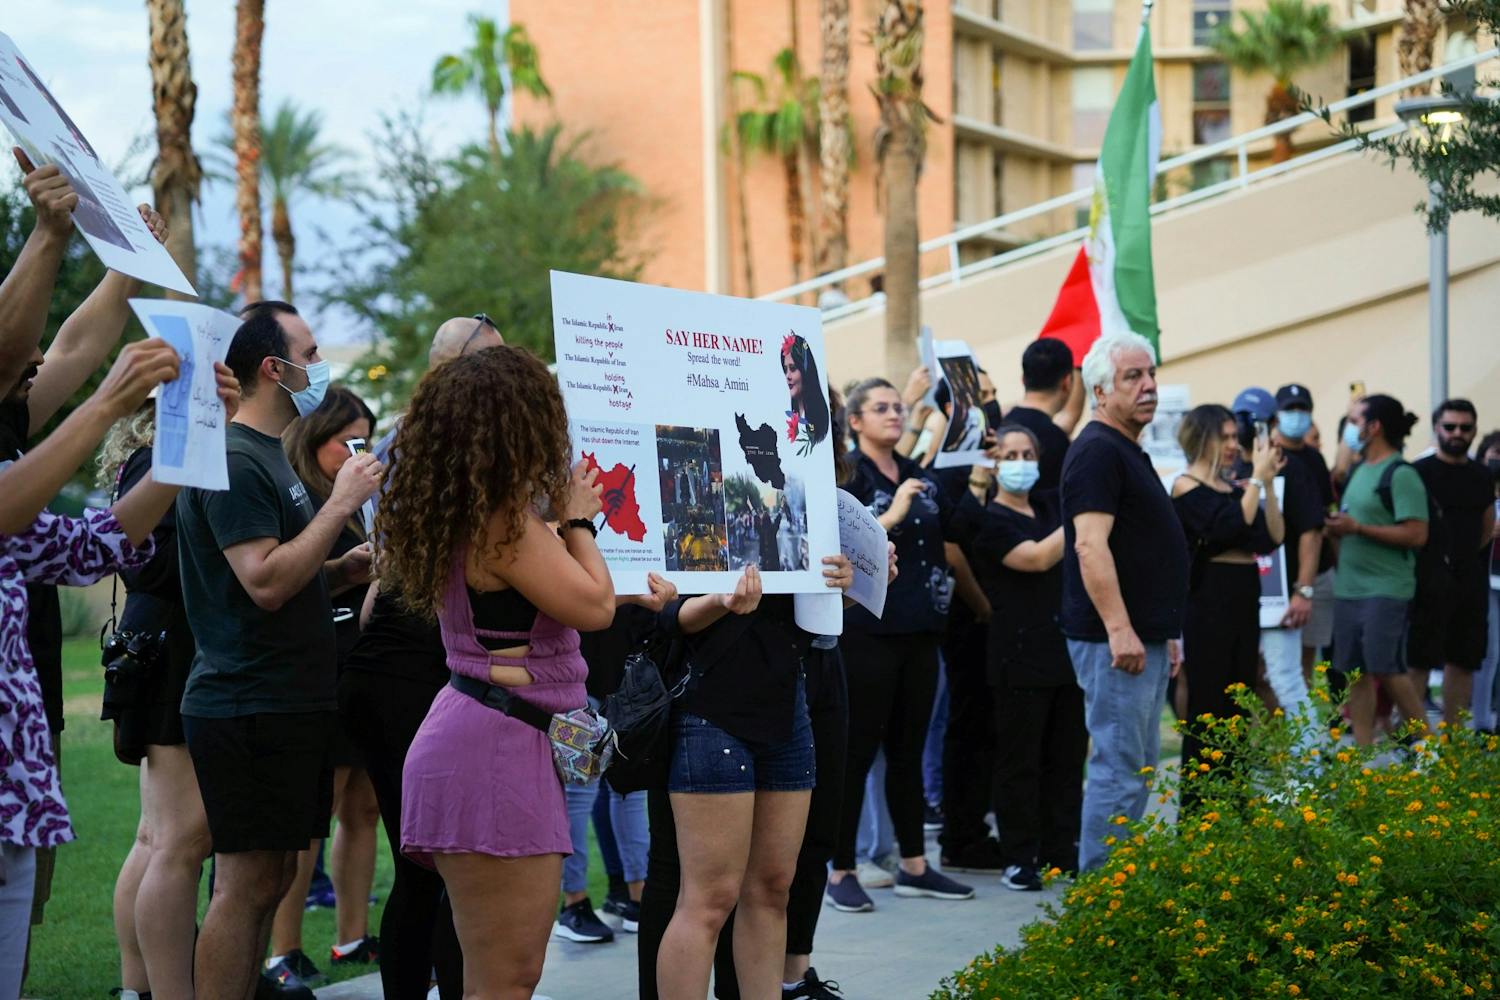 Protestors are pictured on the Tempe campus.&nbsp;